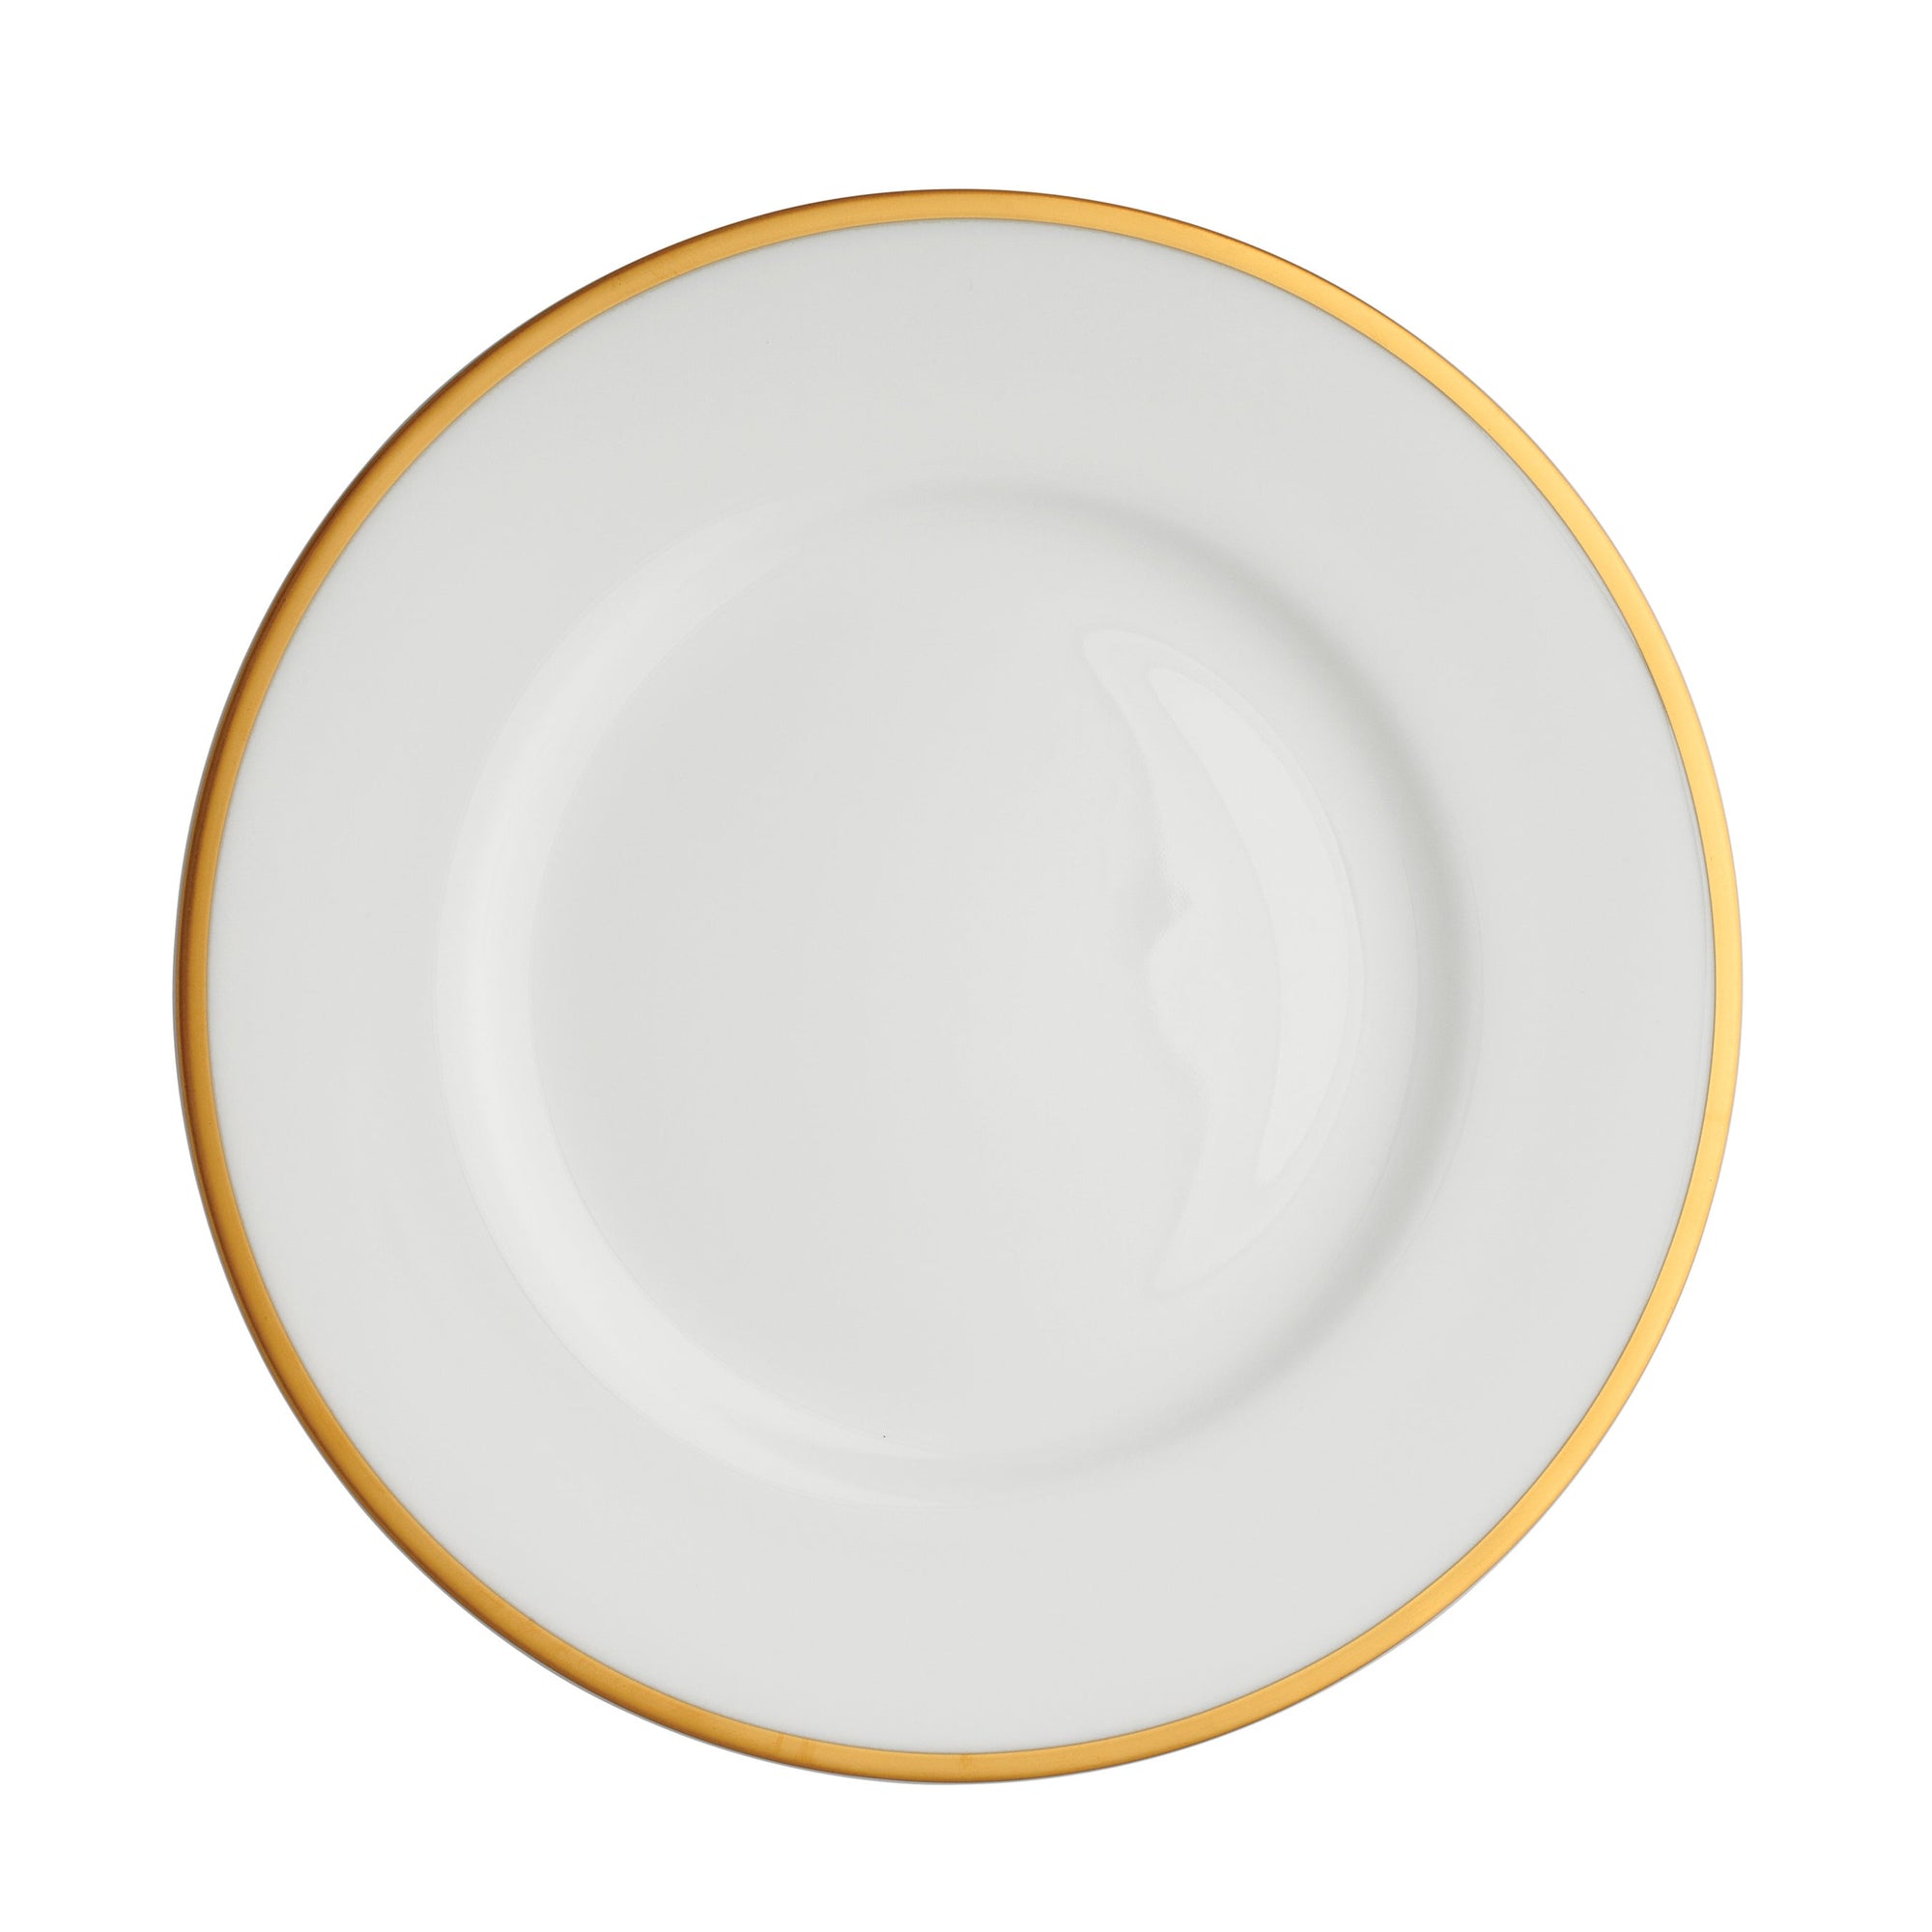 Prouna Comet Gold Dinner Plate White Background Photo